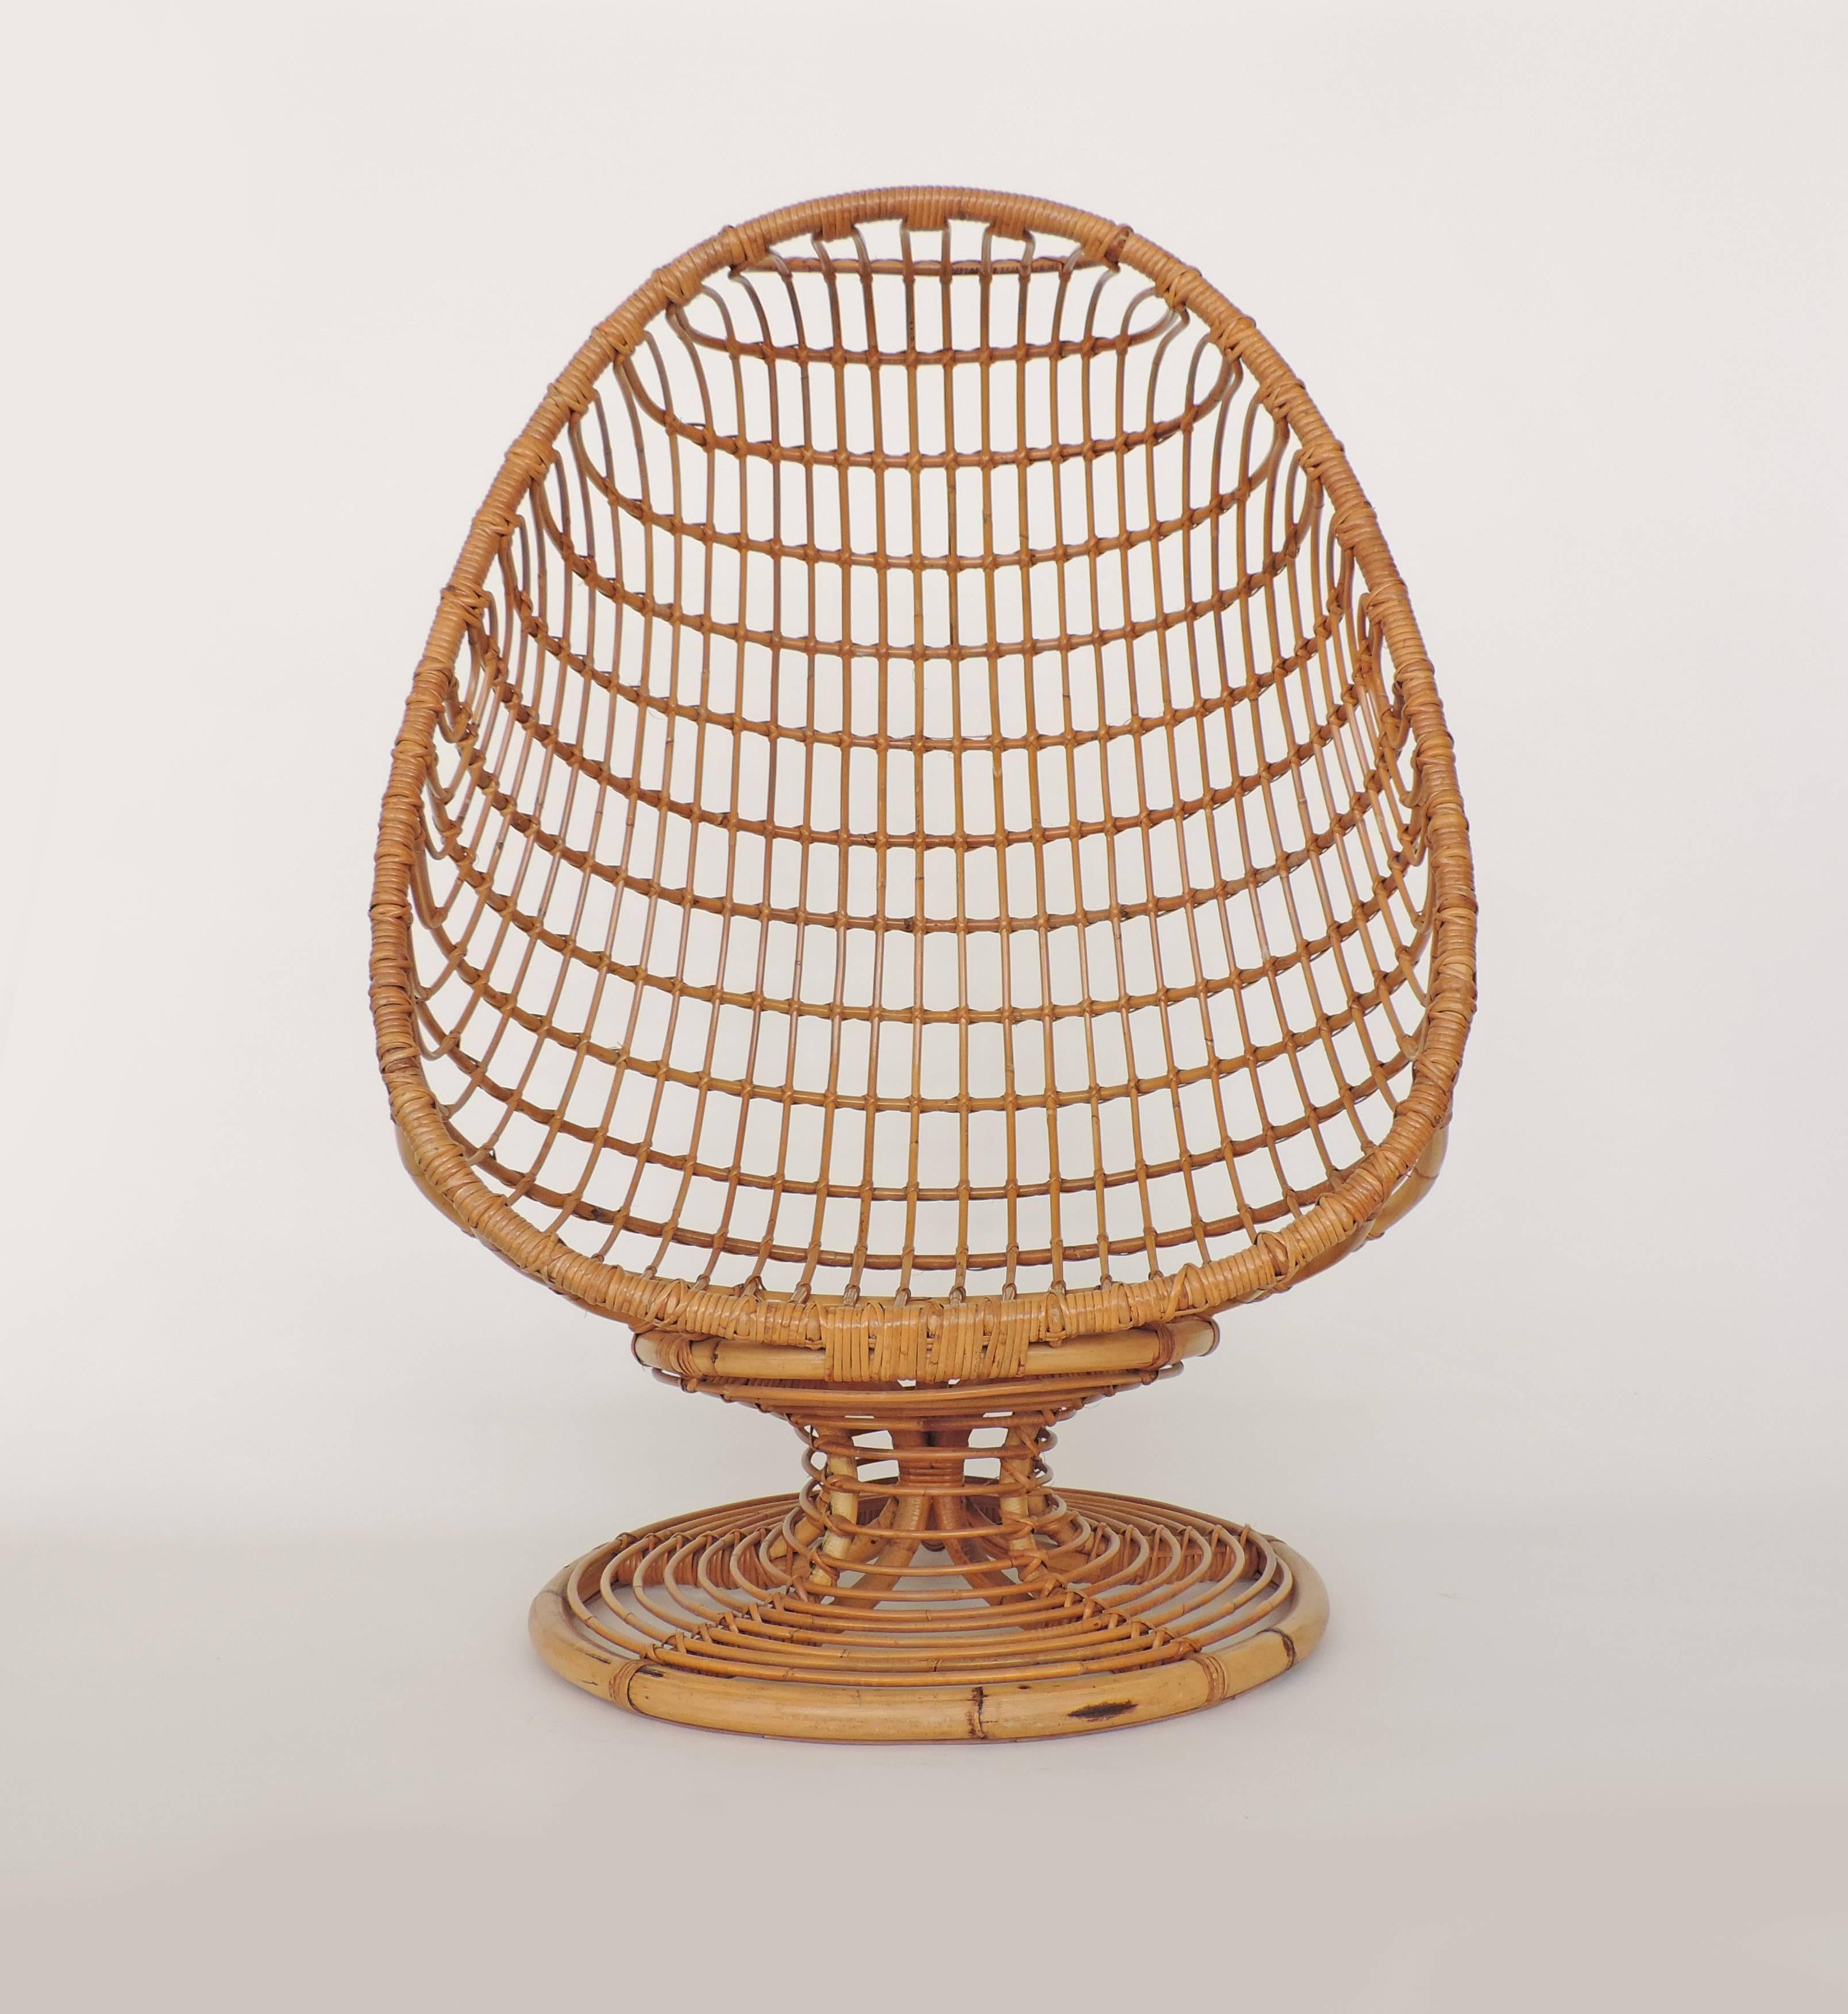 Spectacular bamboo egg chair, Italy, 1960s.